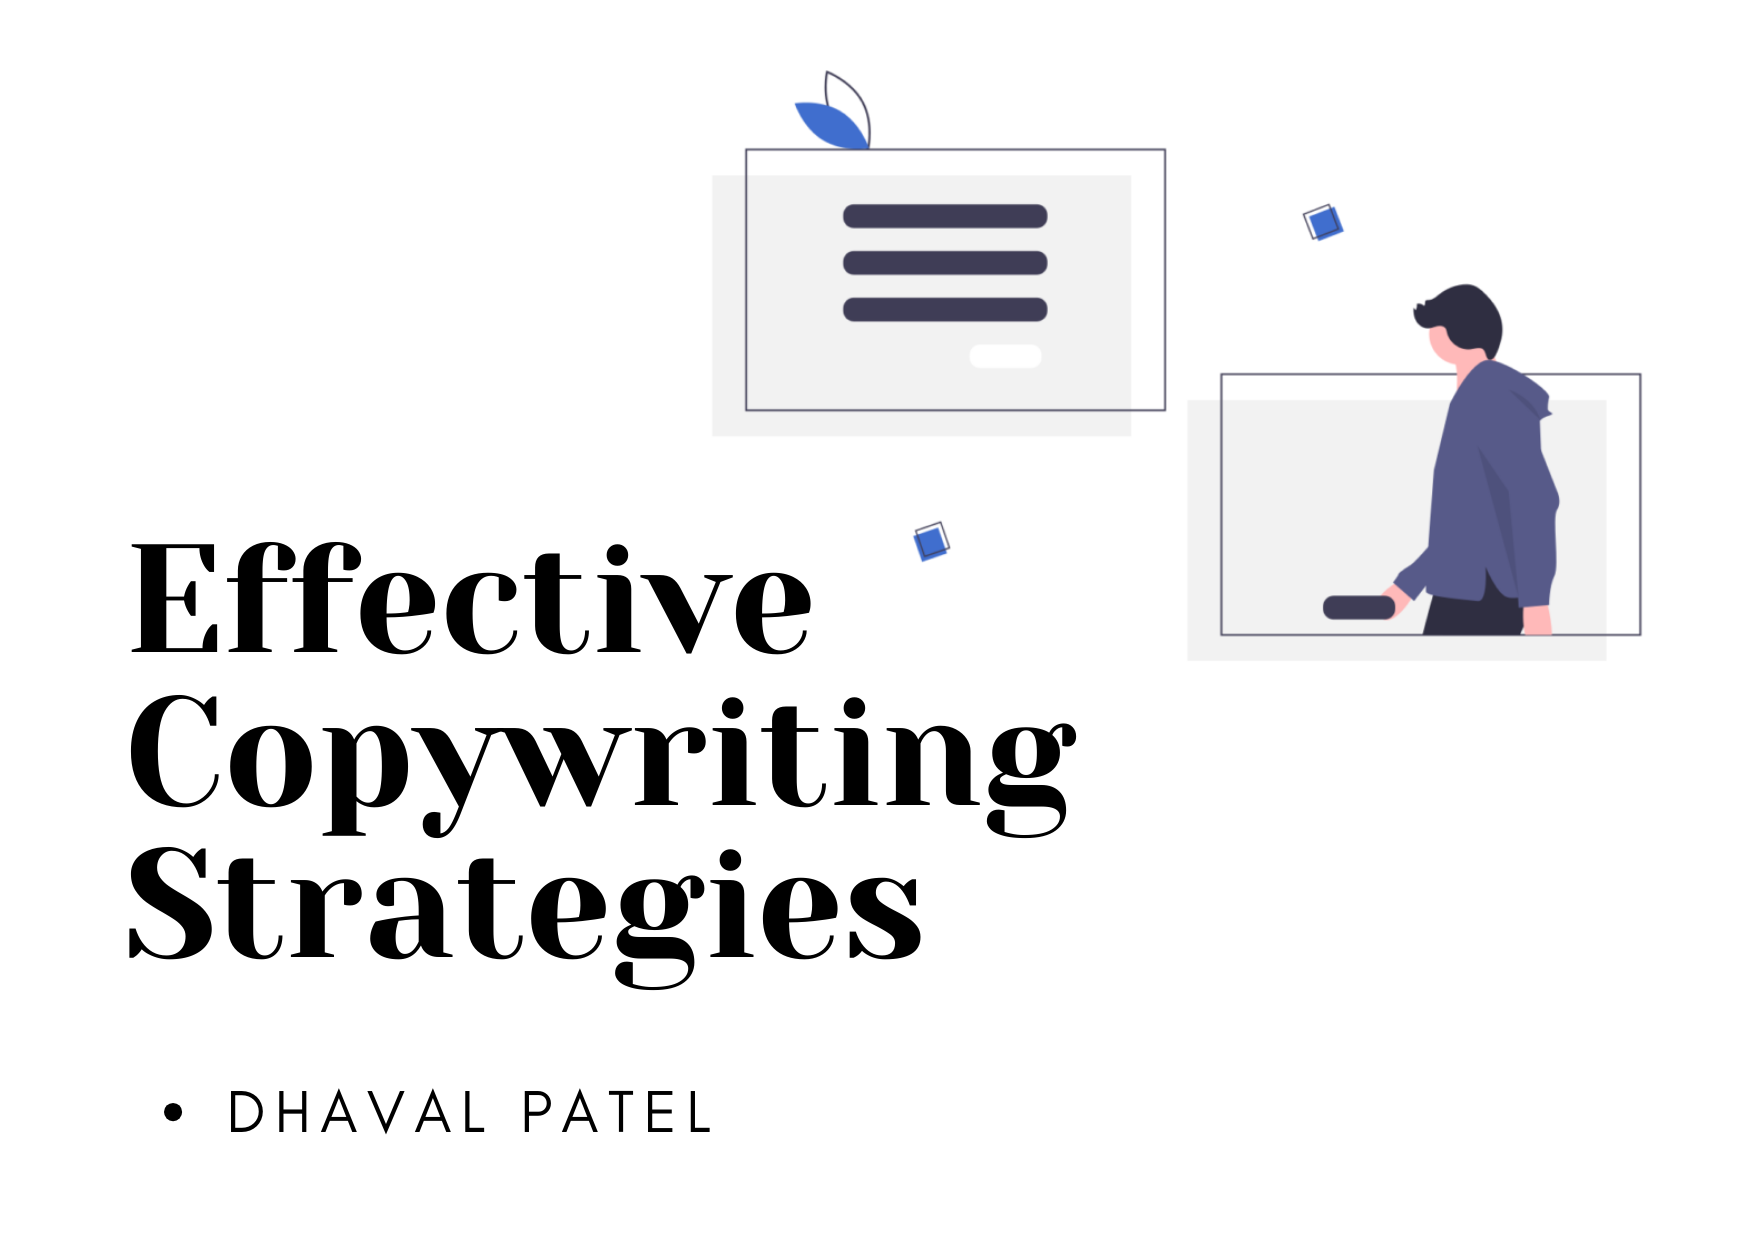 Crafting Compelling Content: A Guide to Effective Copywriting